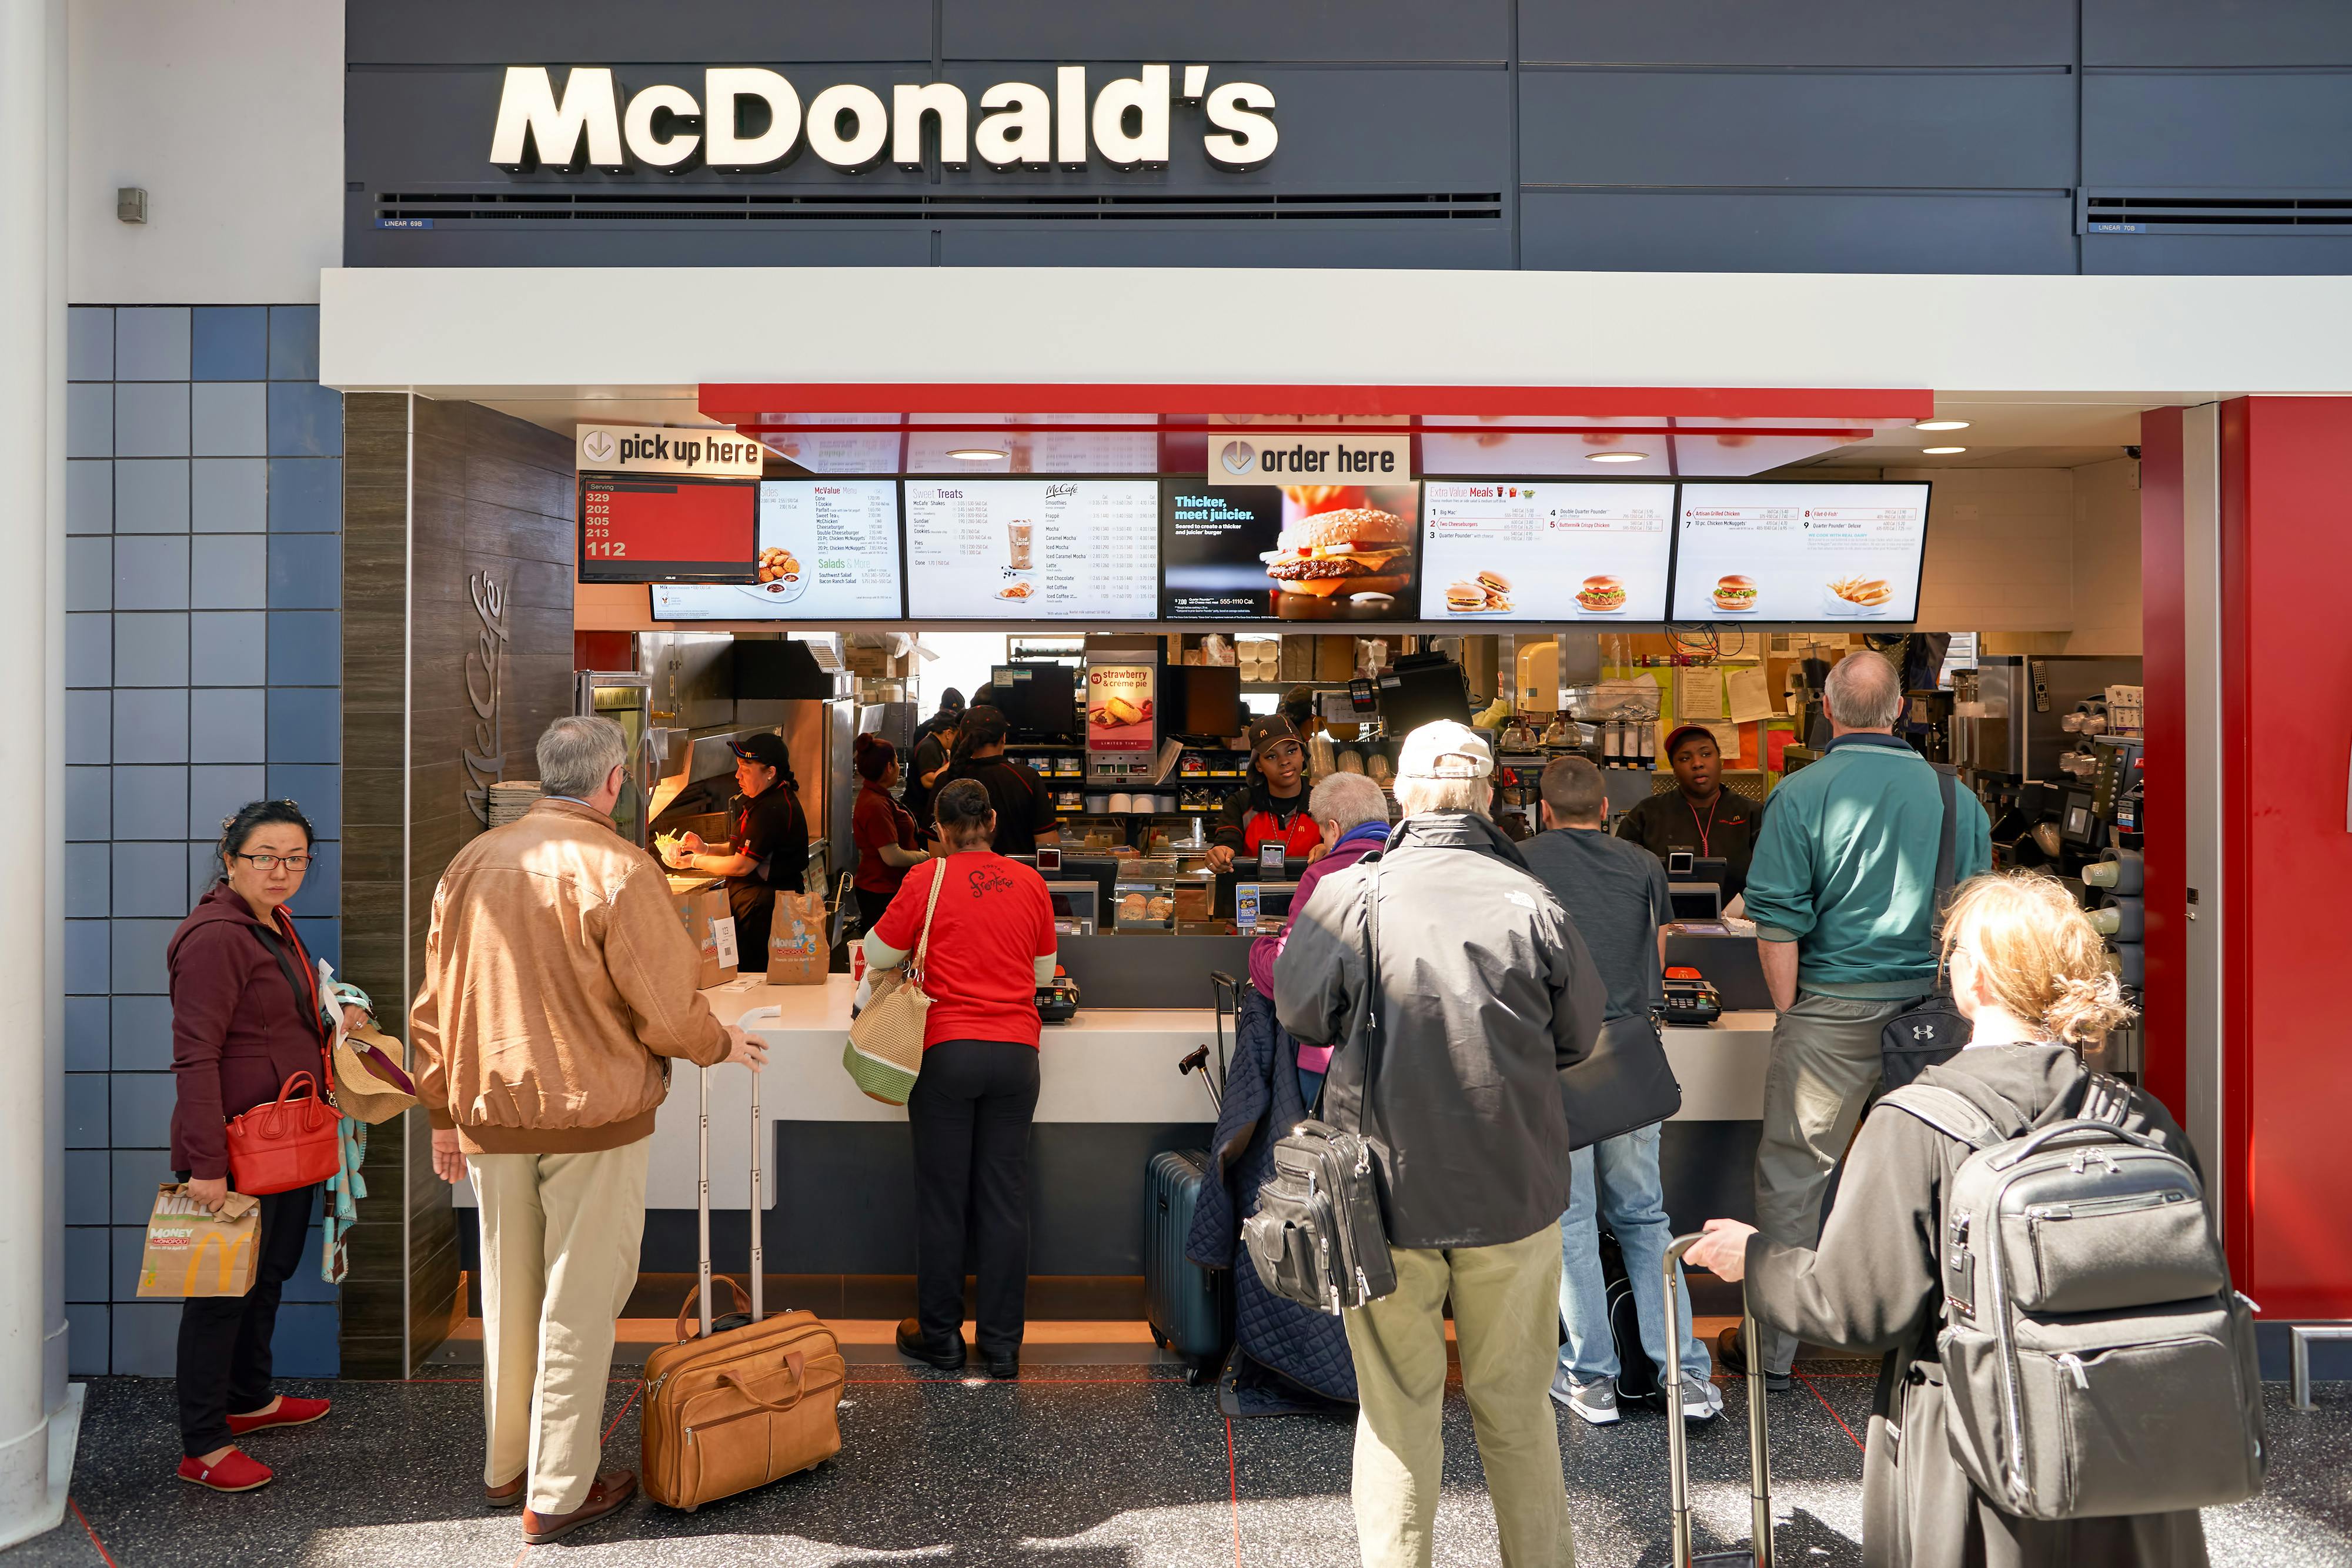 Senior-aged people waiting in line at the McDonald's restaurant counter inside an airport.